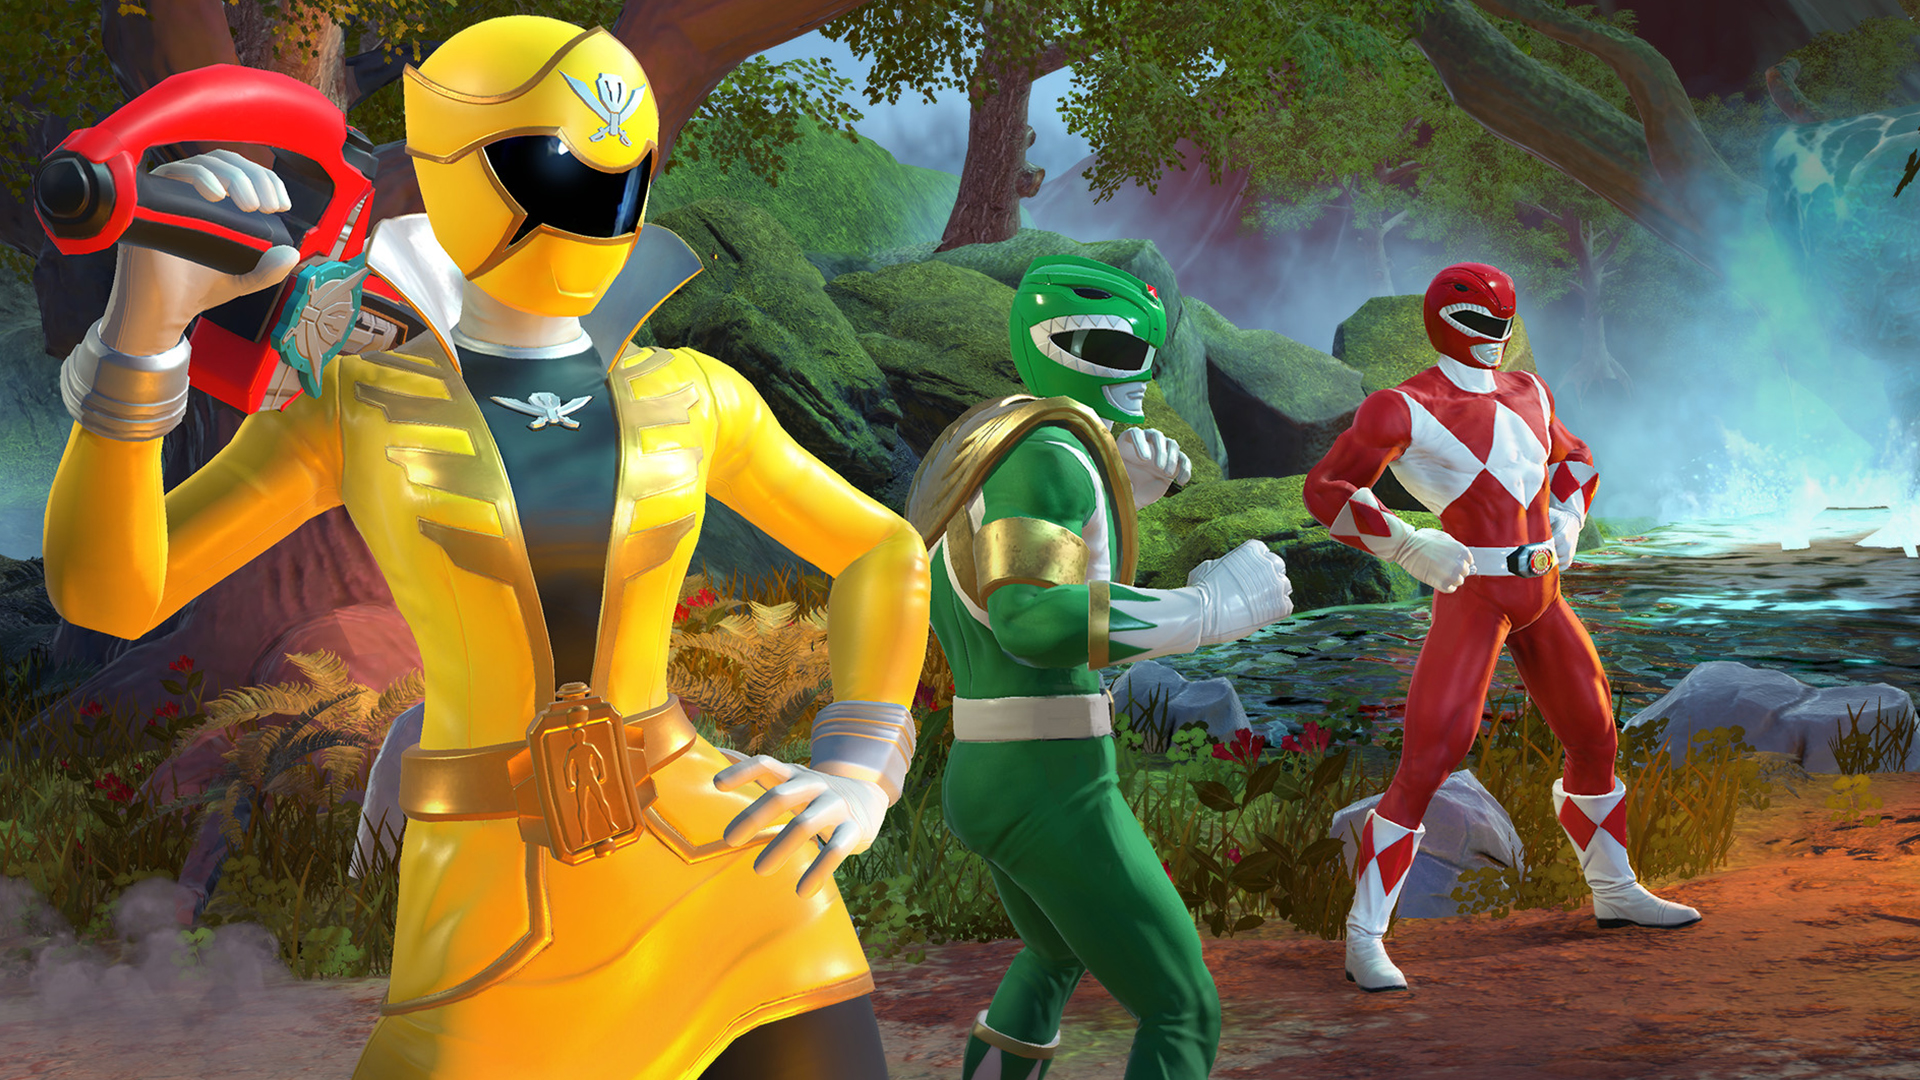 Power Rangers is now the first fighting game with crossplay across all